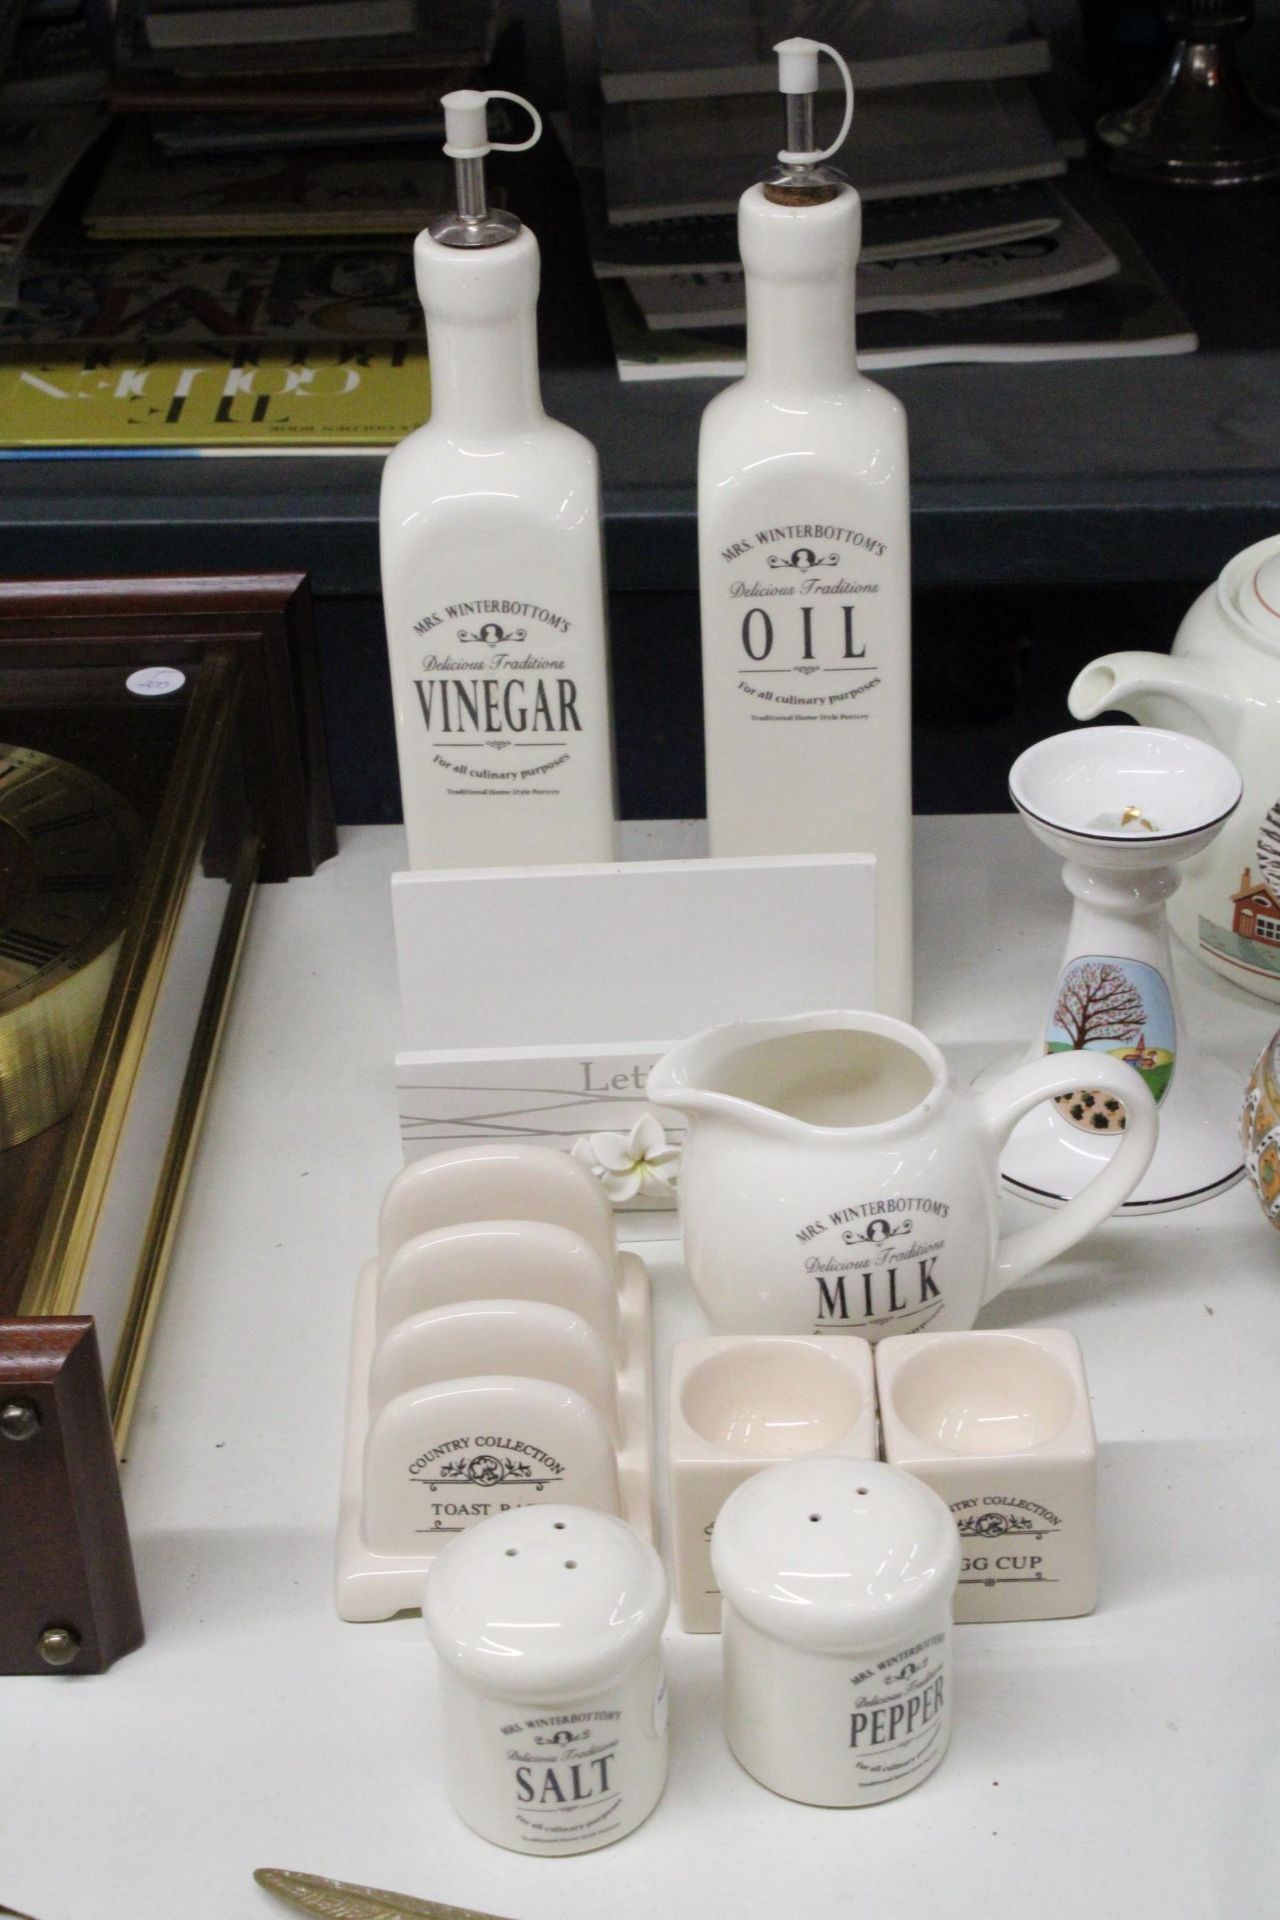 A SET OF MRS WINTERBOTTOM'S 'DELICIOUS TRADITIONS' TABLEWARE TO INCLUDE A MILK JUG, OIL AND